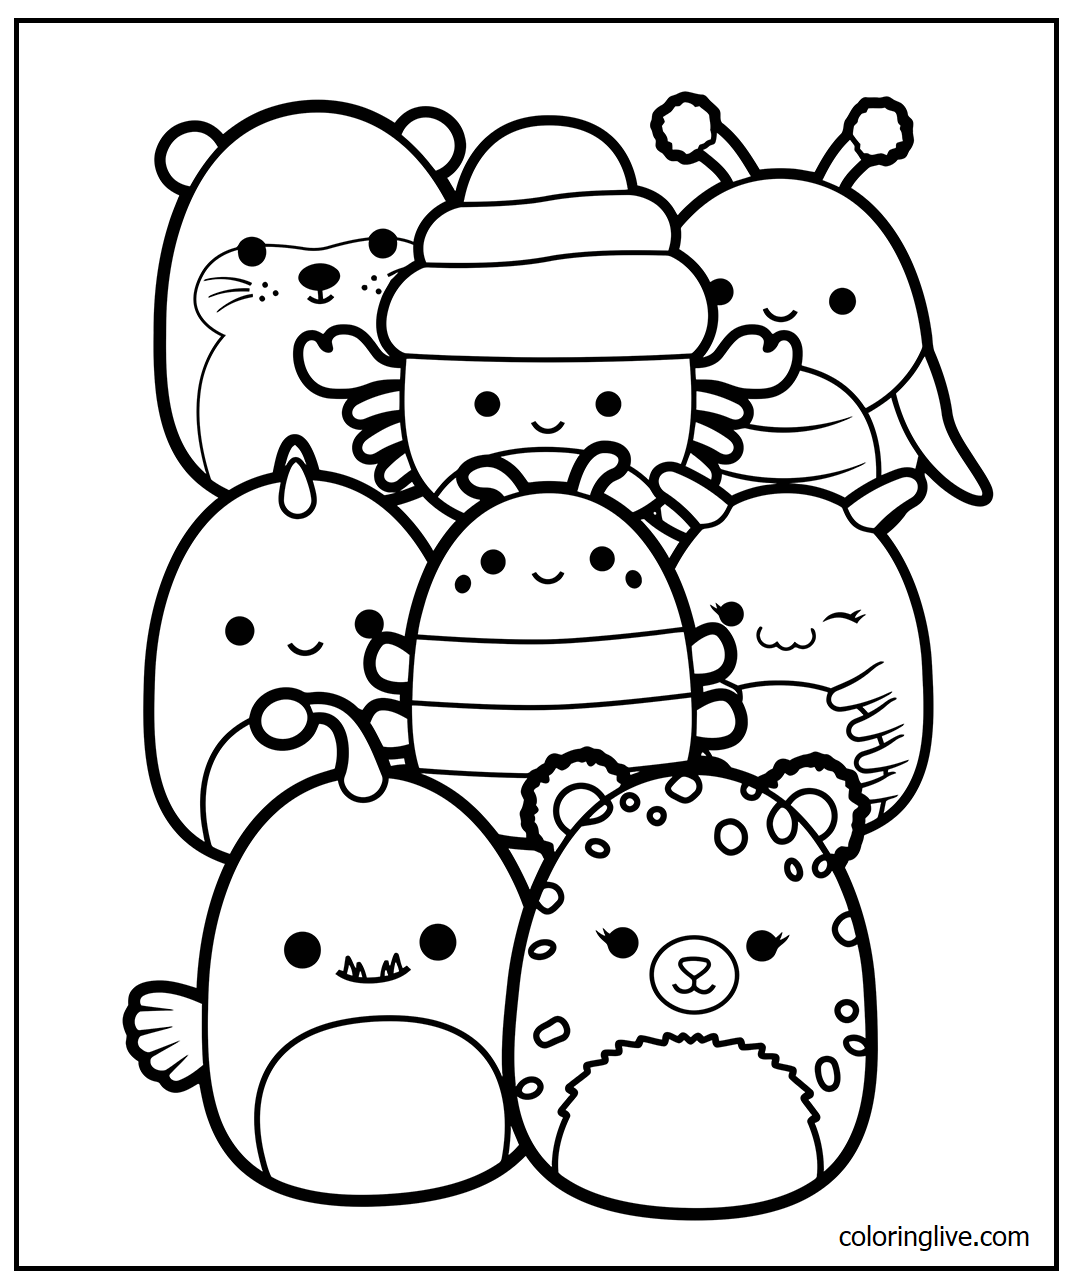 Printable Squishmallow   14 Coloring Page for kids.